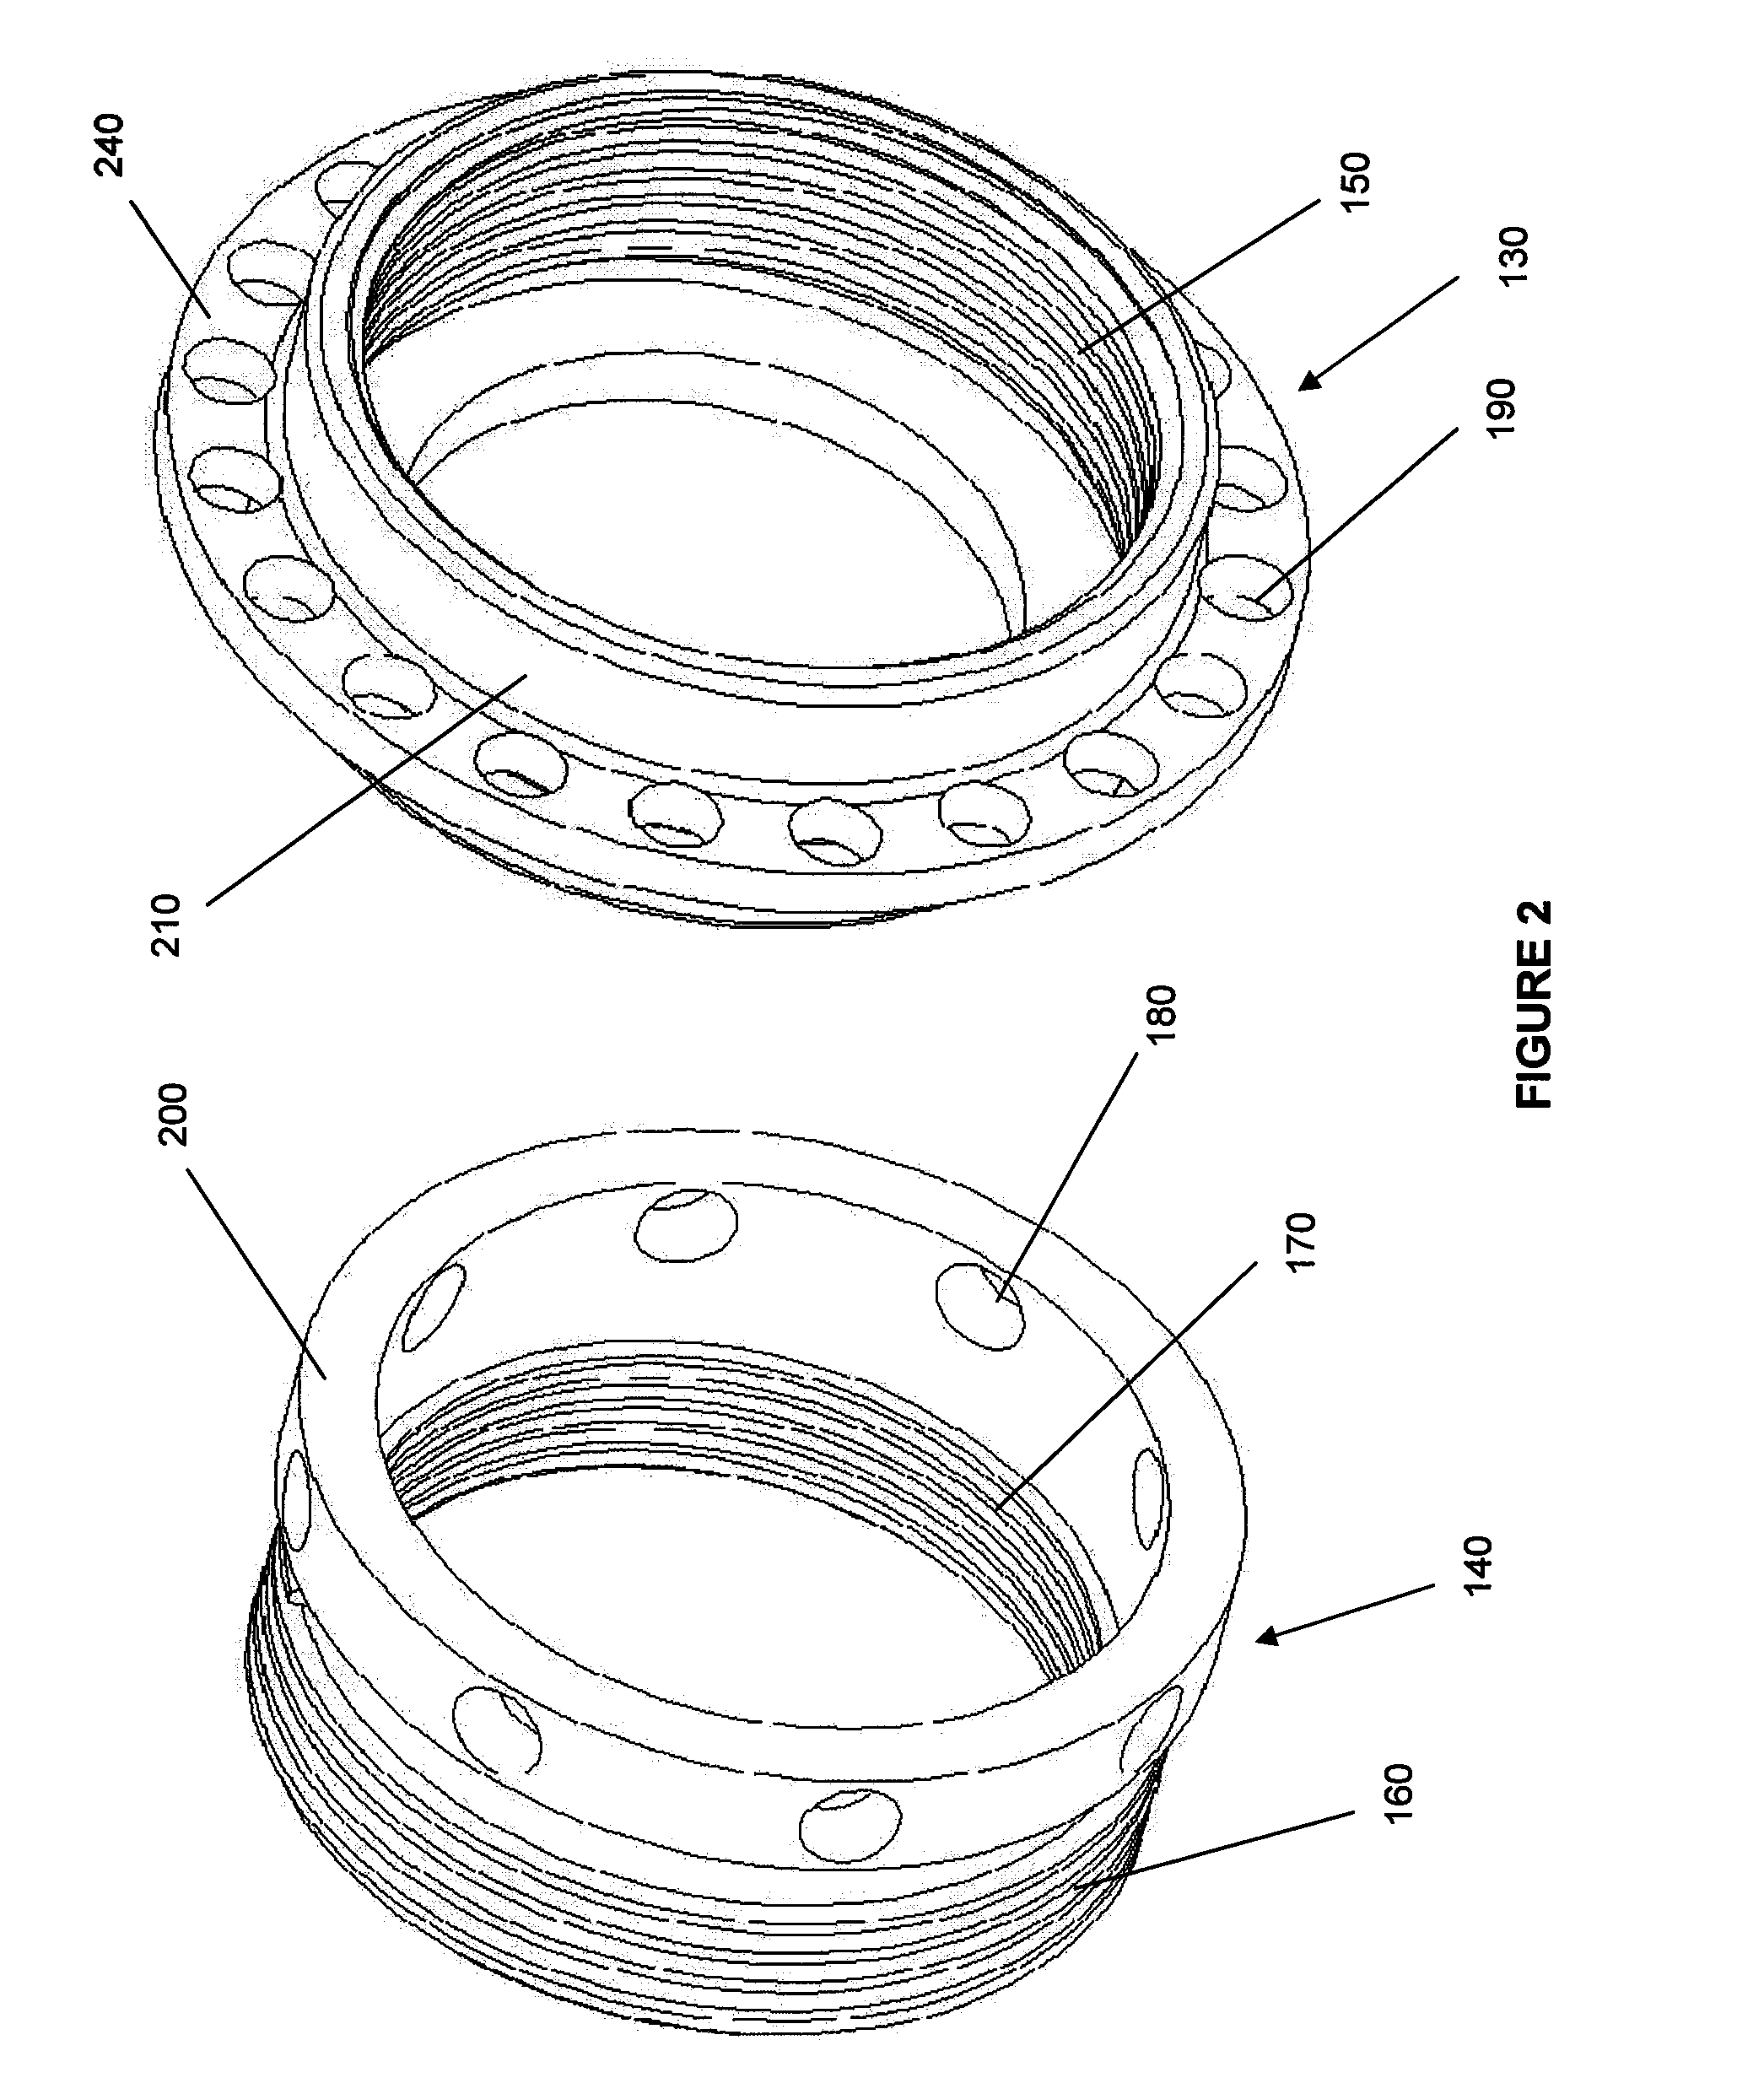 Differential pitch hammerless connection with hydraulic driving mechanism